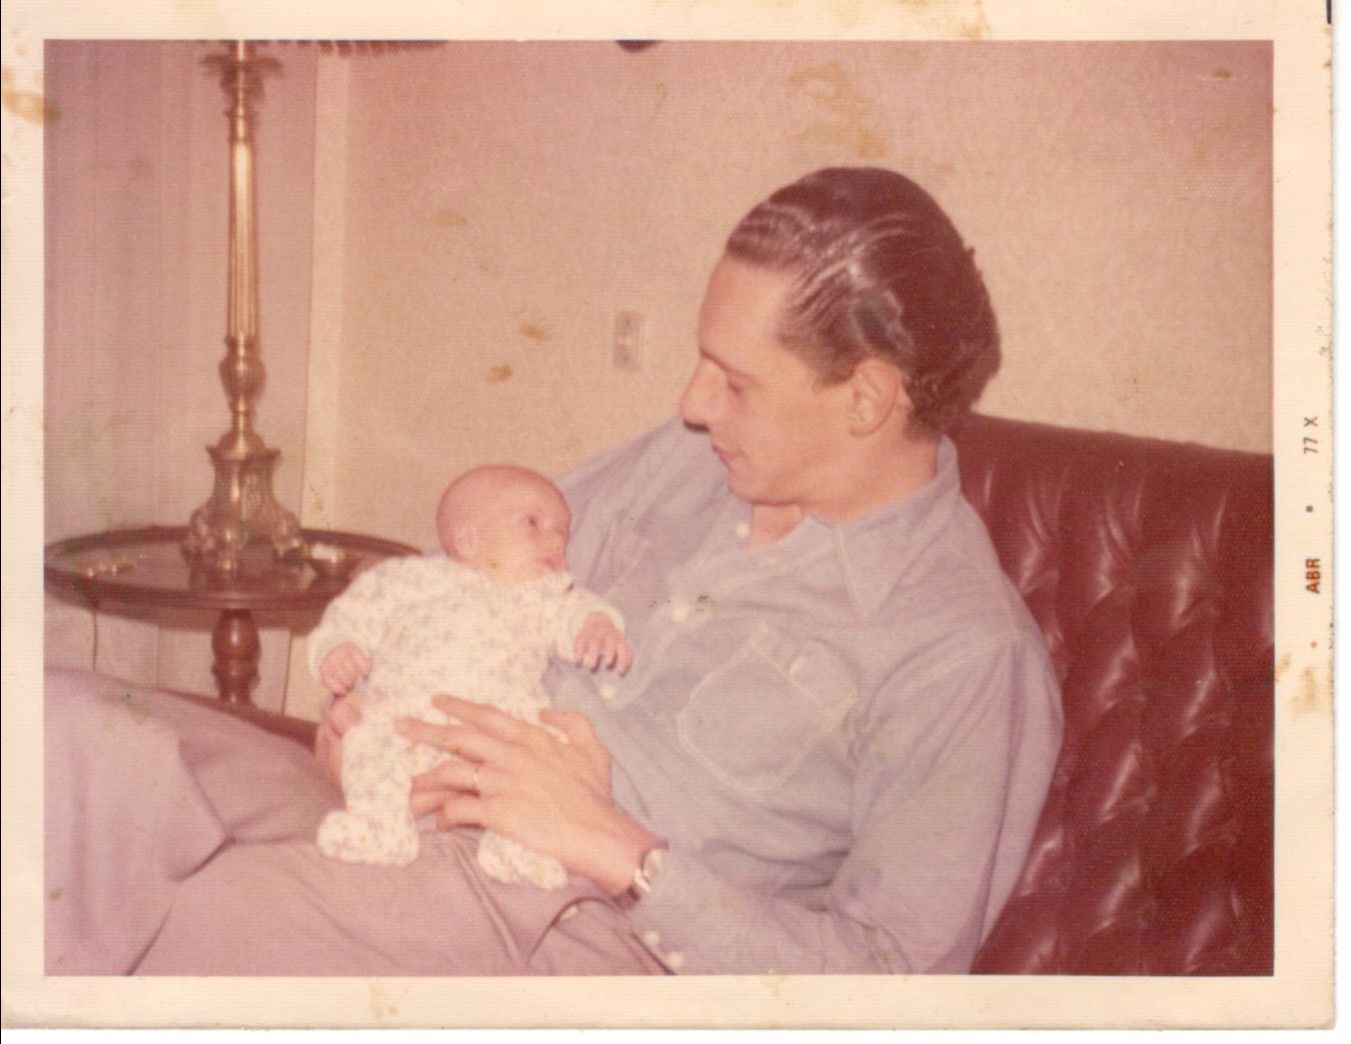 In the arms of her father, Juan Manuel Abal Medina, newborn, in 1975 (Personal Archive)